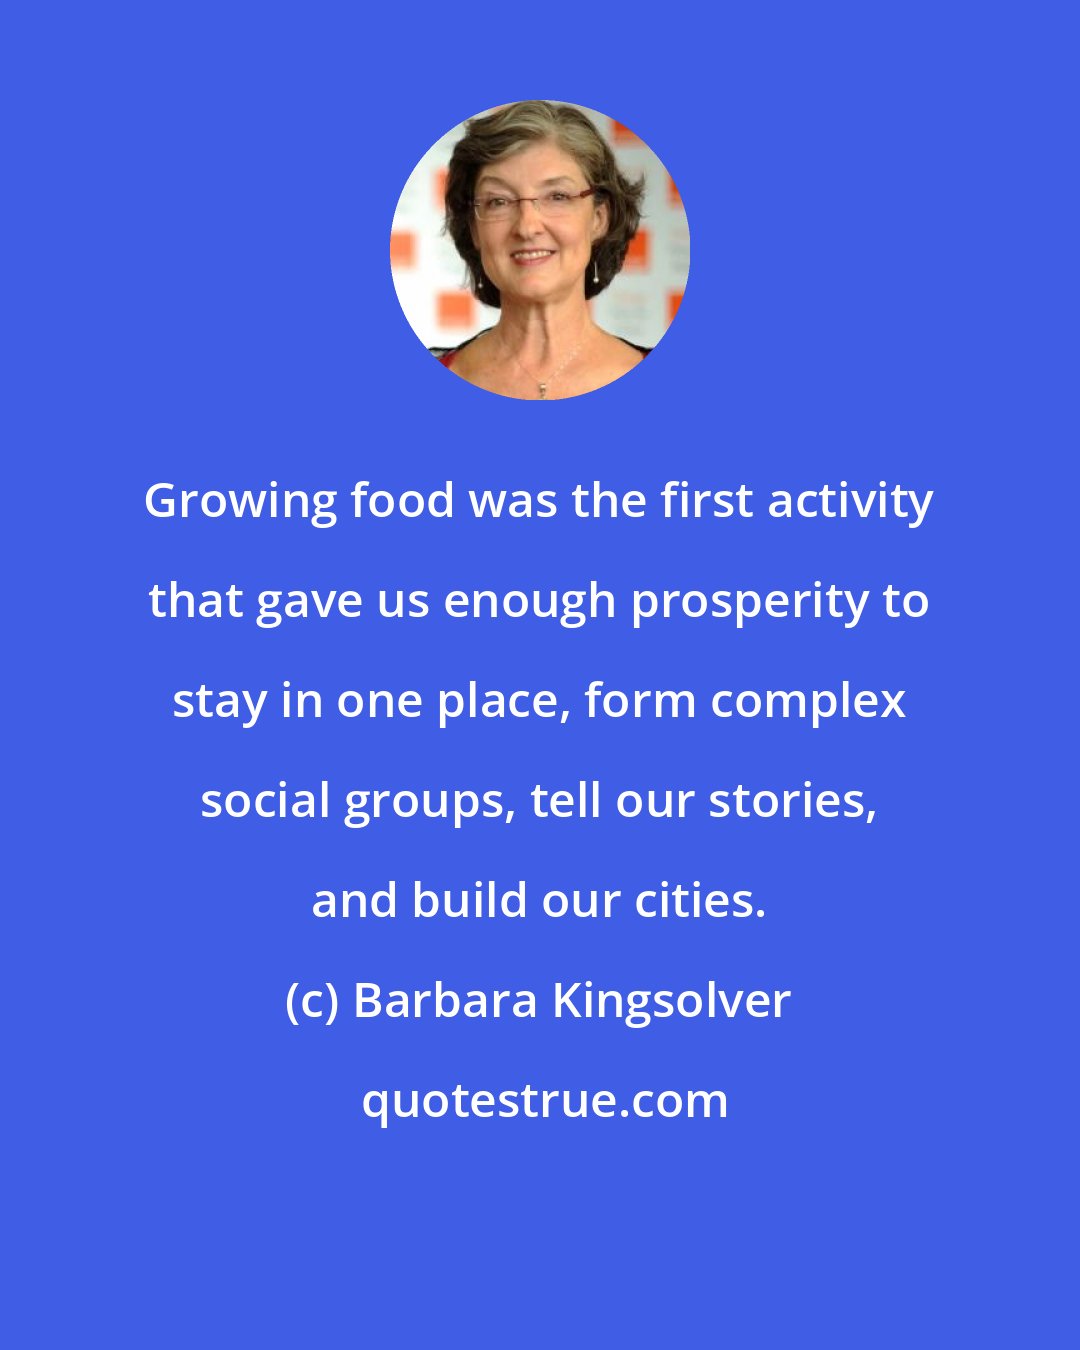 Barbara Kingsolver: Growing food was the first activity that gave us enough prosperity to stay in one place, form complex social groups, tell our stories, and build our cities.